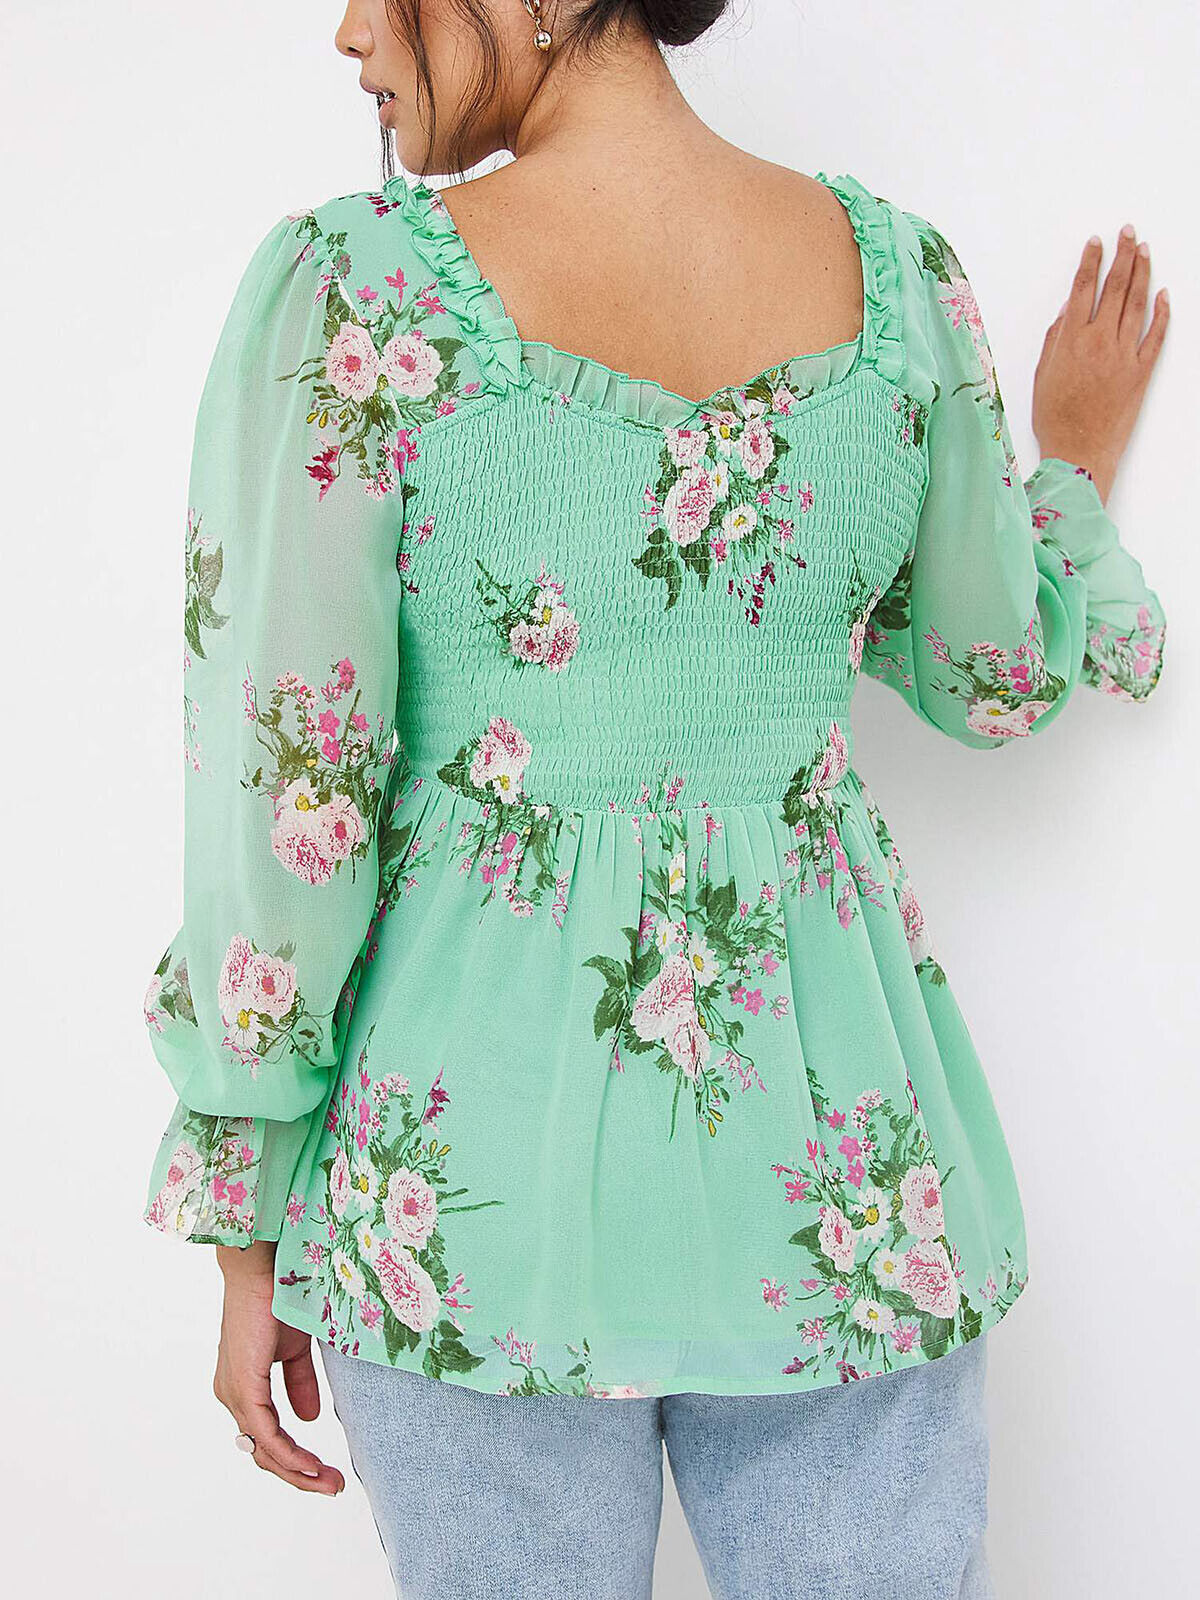 Simply Be Green Floral Shirred Frill Square Neck Top 18, 20, 22, 24, 28 RRP £32